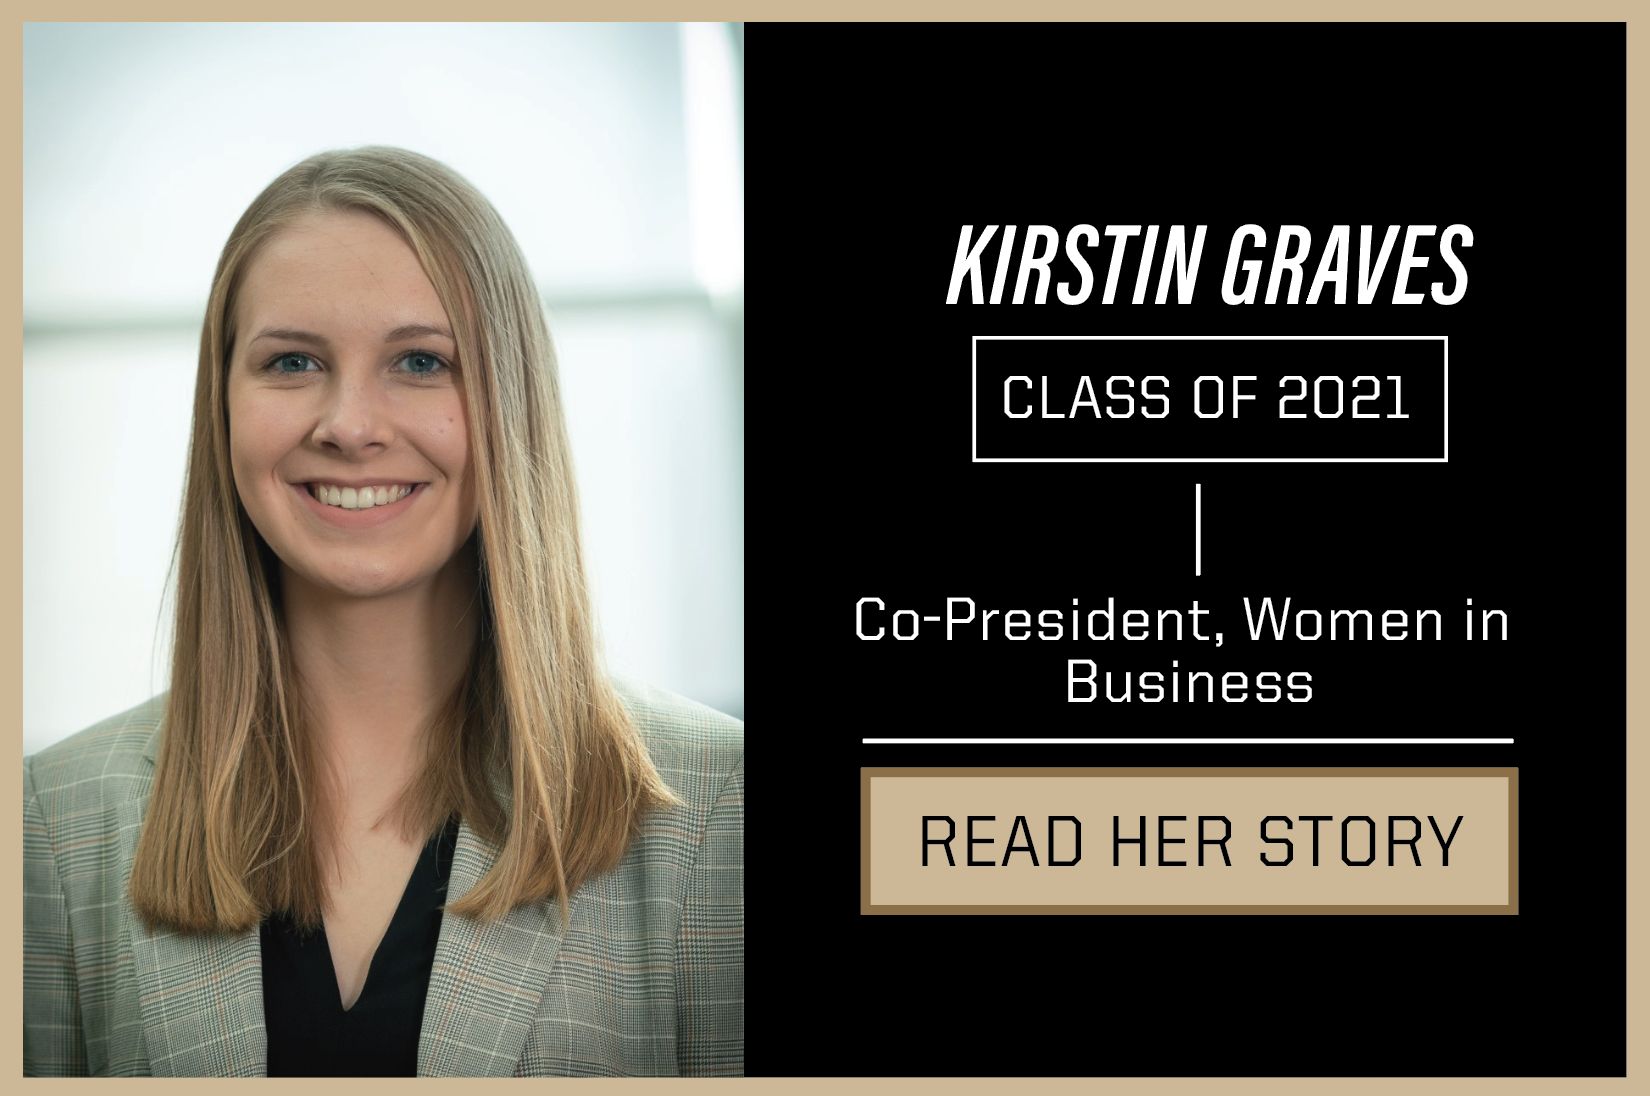 Kristin Graves Class of 2021. Co-President, Women in Business. Read her story.